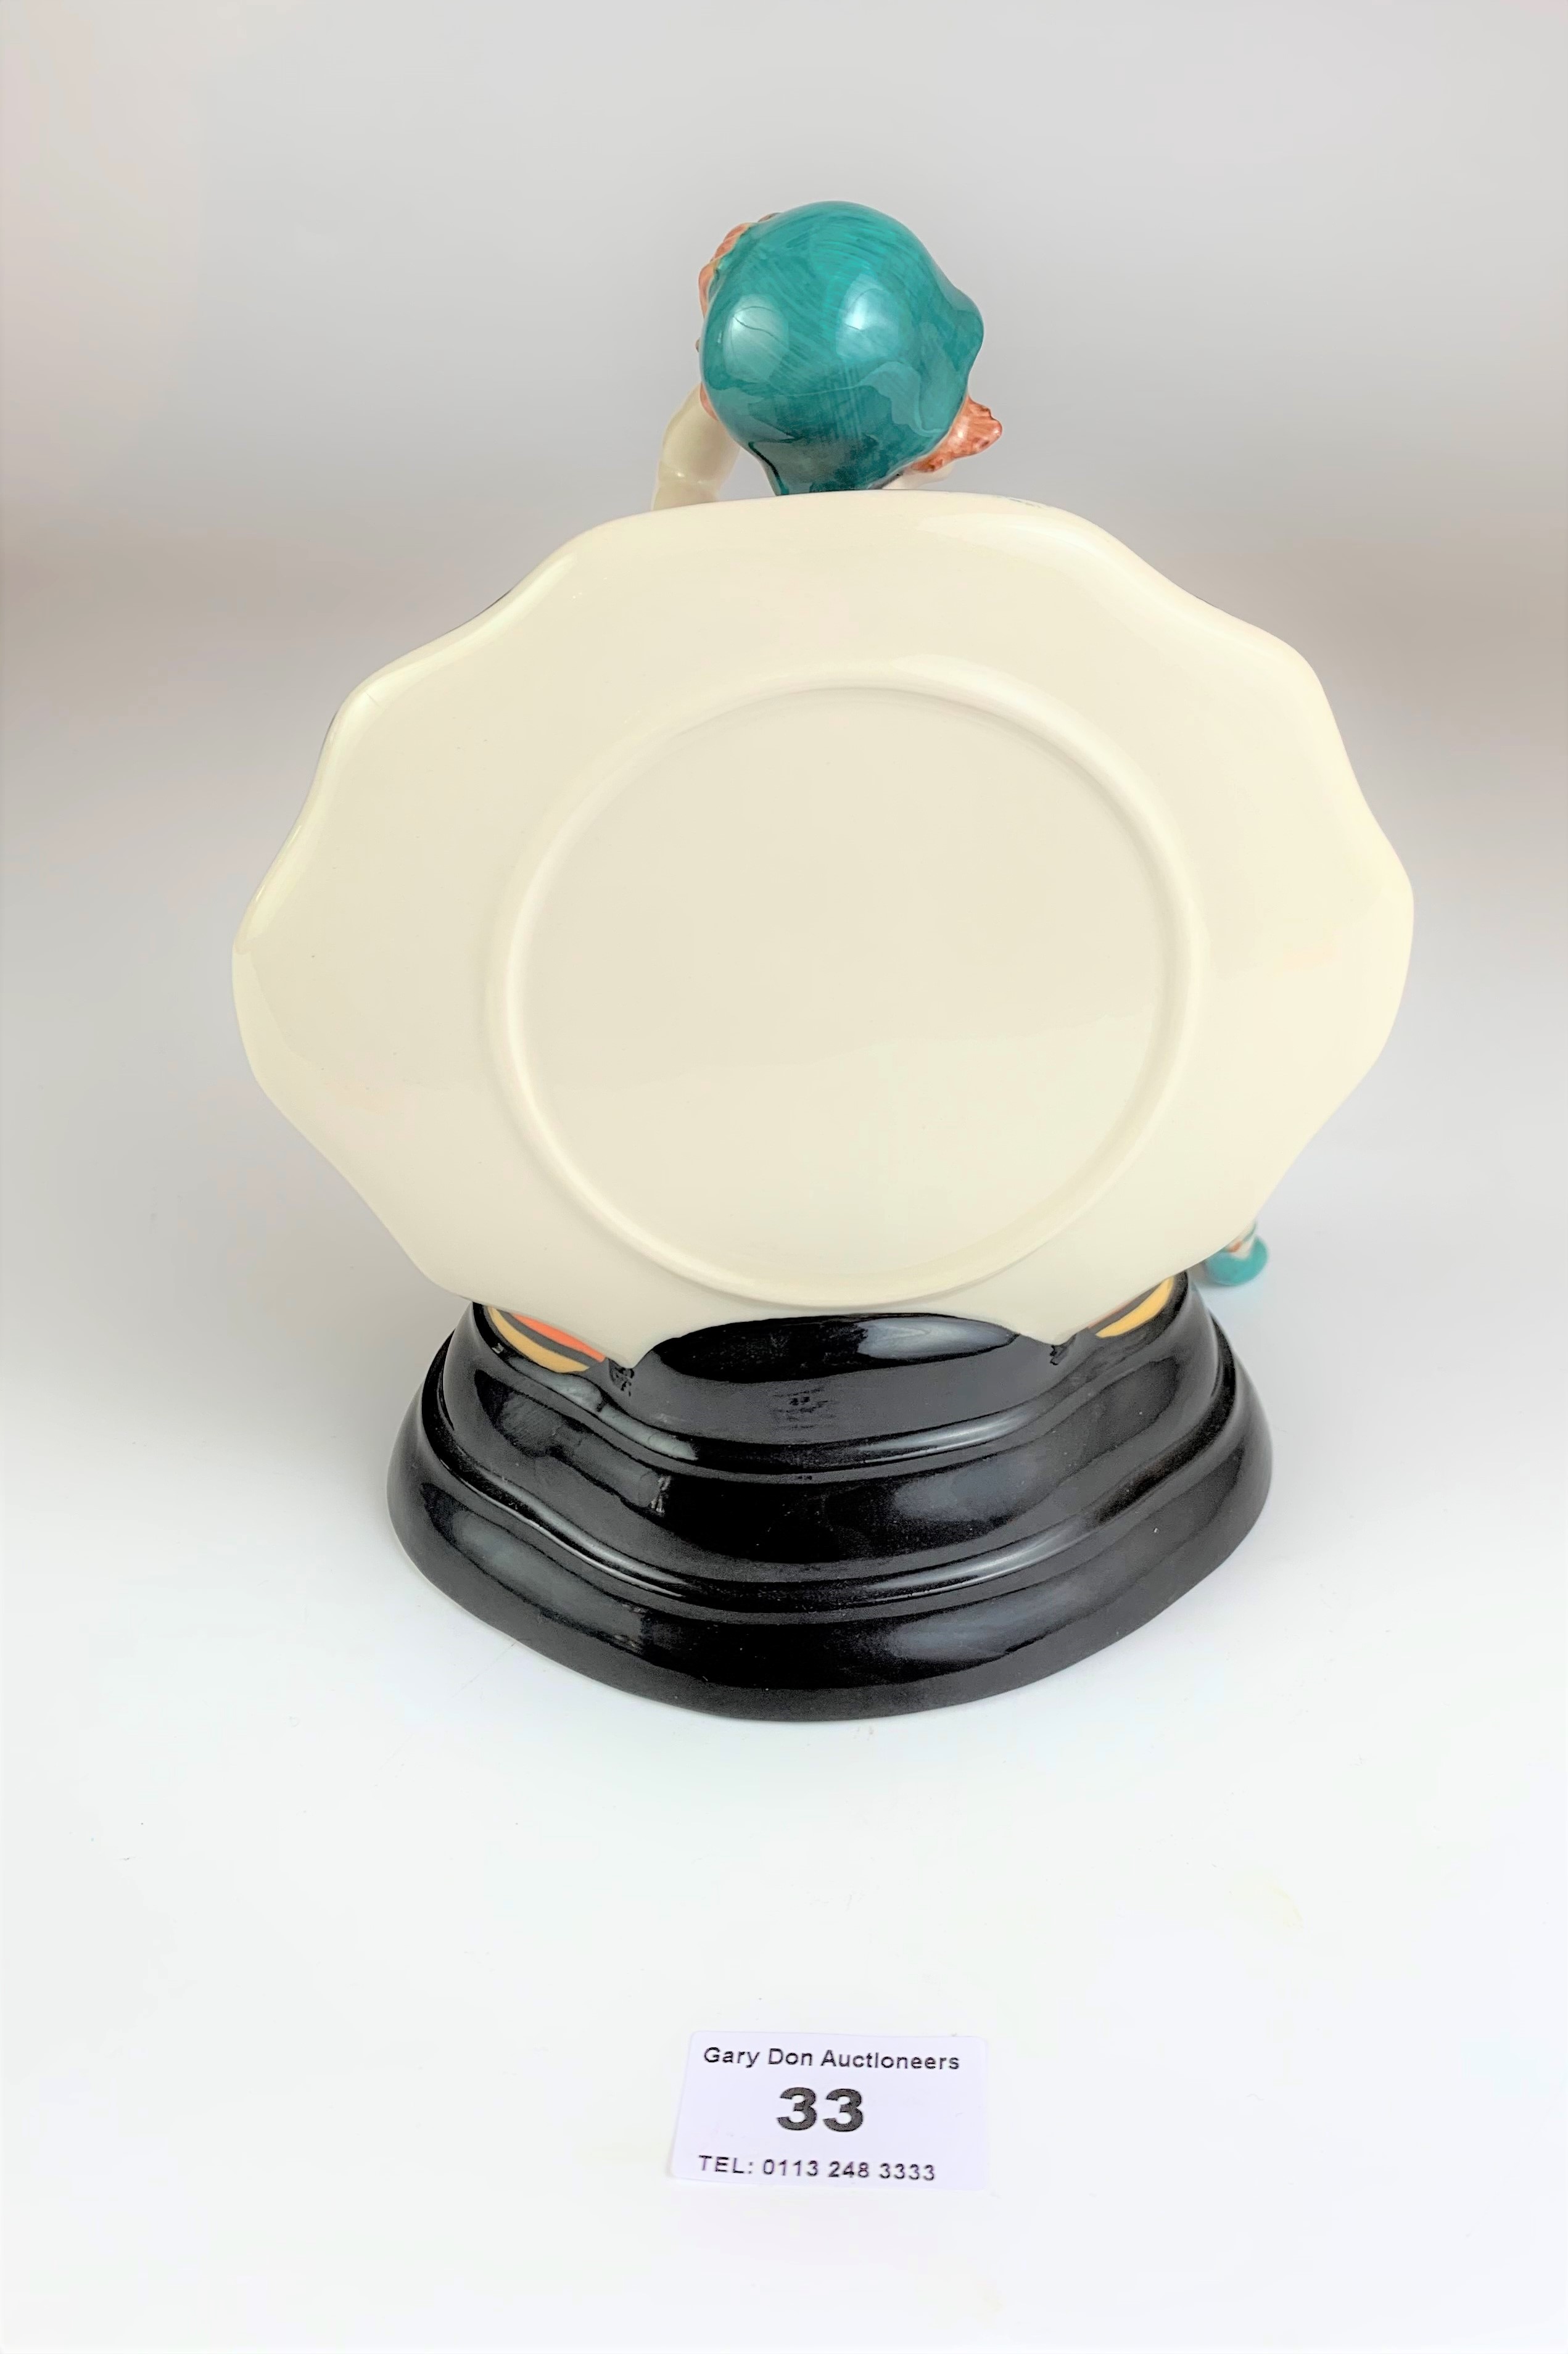 Ceramic figure by Peggy Davies – Putting on the Ritz, no. 147/1250 - Image 3 of 5